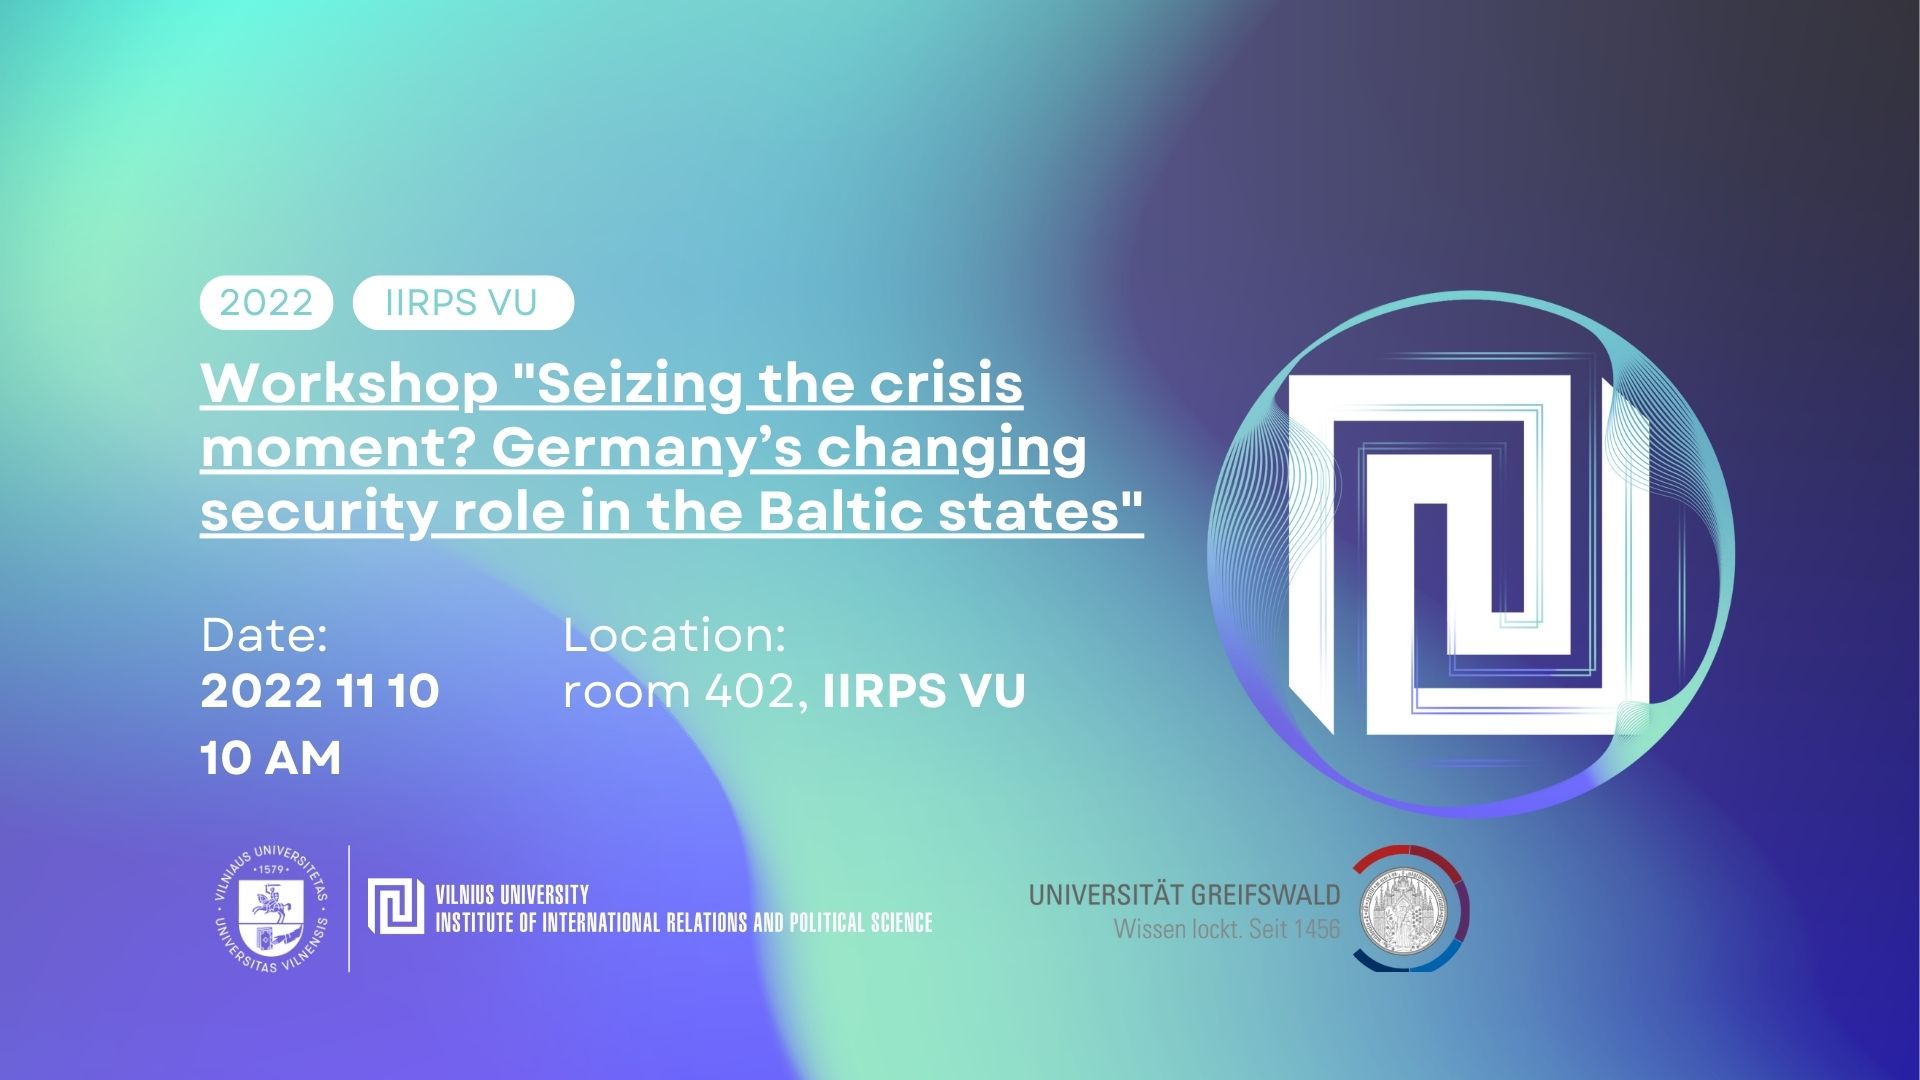 Workshop “Seizing the crisis moment? Germany’s changing security role in the Baltic states”